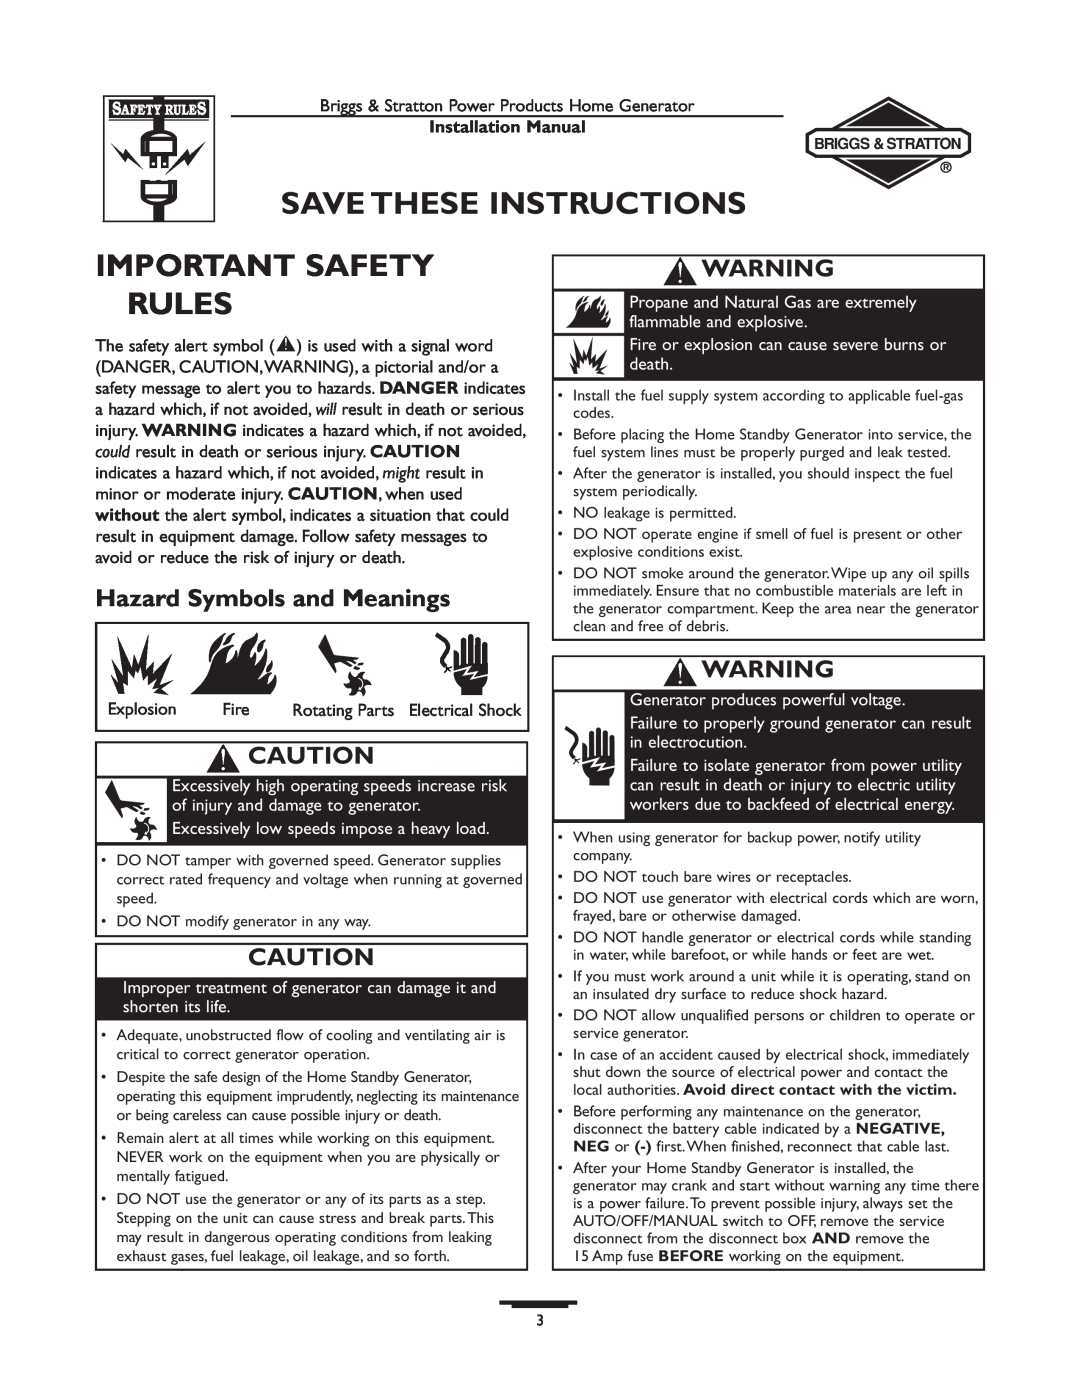 Briggs & Stratton 01815-0, 01938-0 manual Save These Instructions, Important Safety Rules, Hazard Symbols and Meanings 